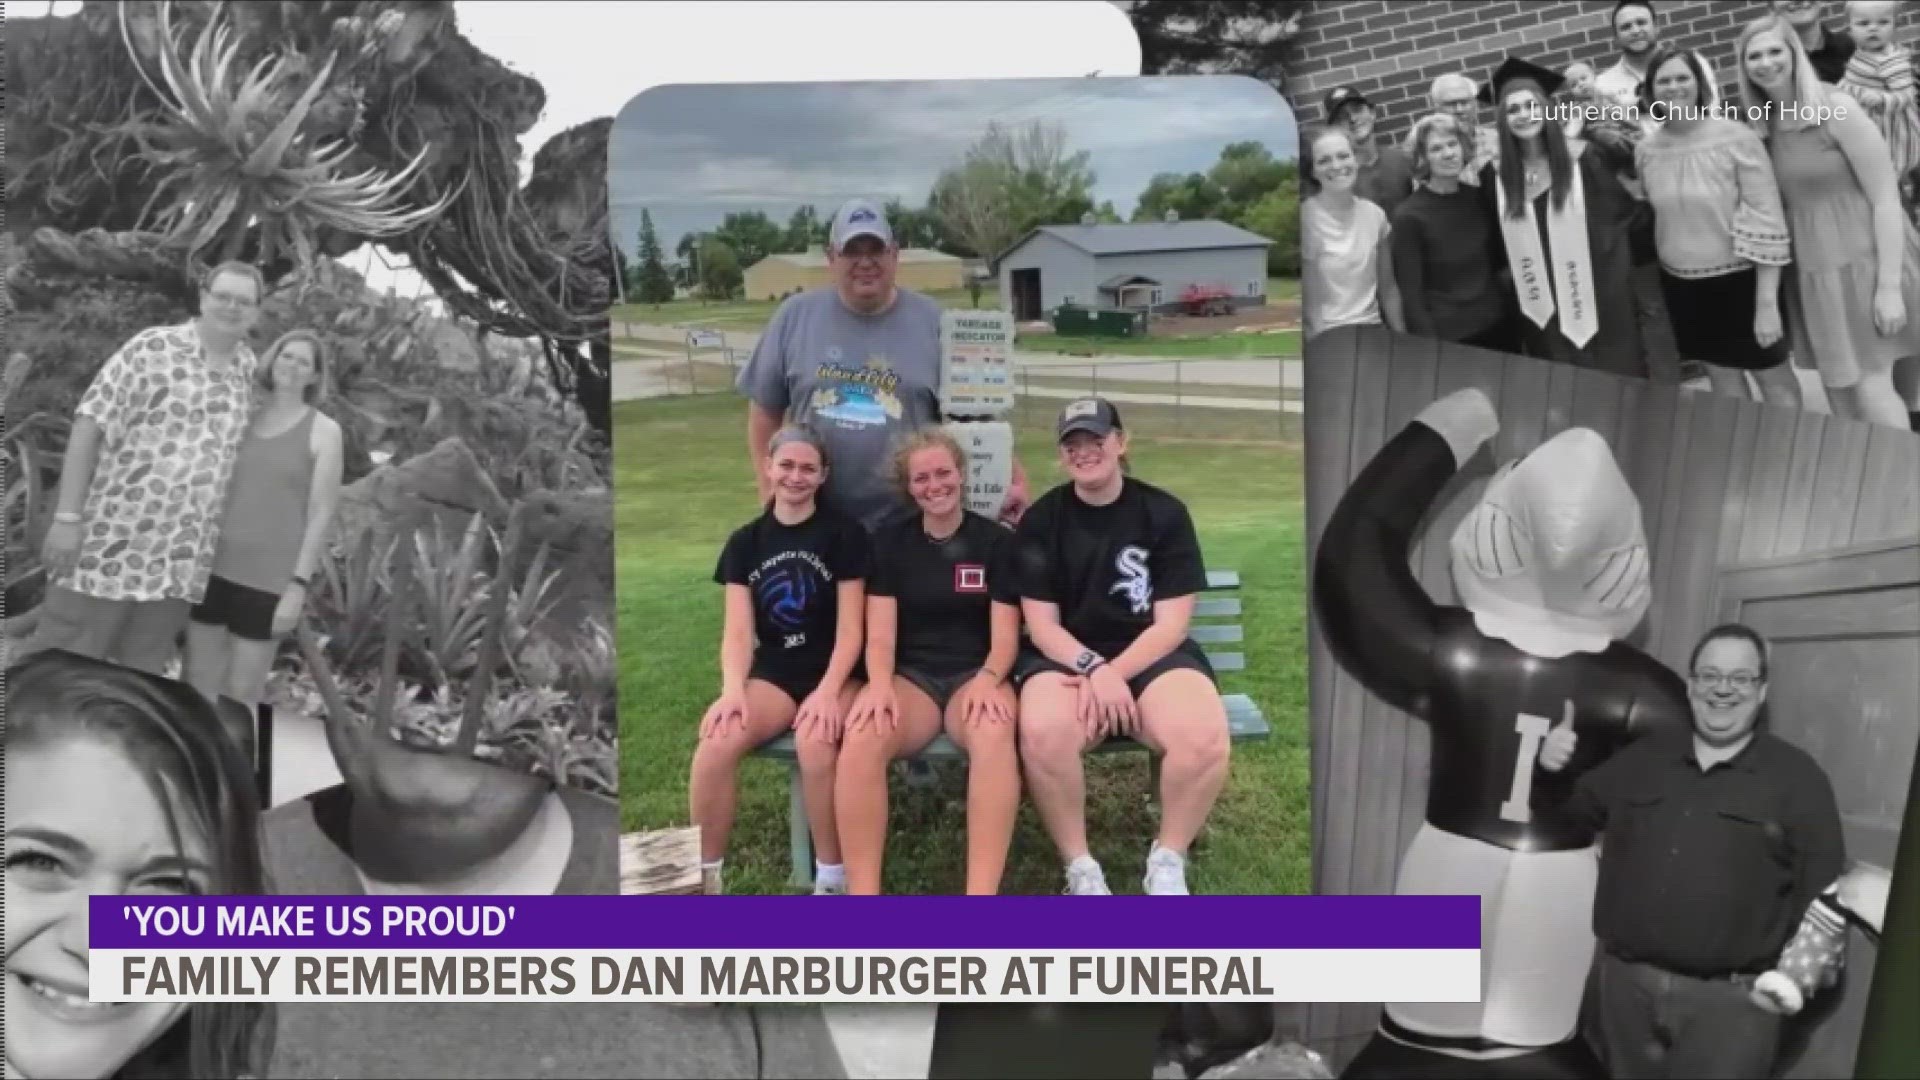 Saturday morning, hundreds of Iowans from Perry and surrounding communities bid farewell to Perry High School’s longtime Principal Dan Marburger at a public funeral.